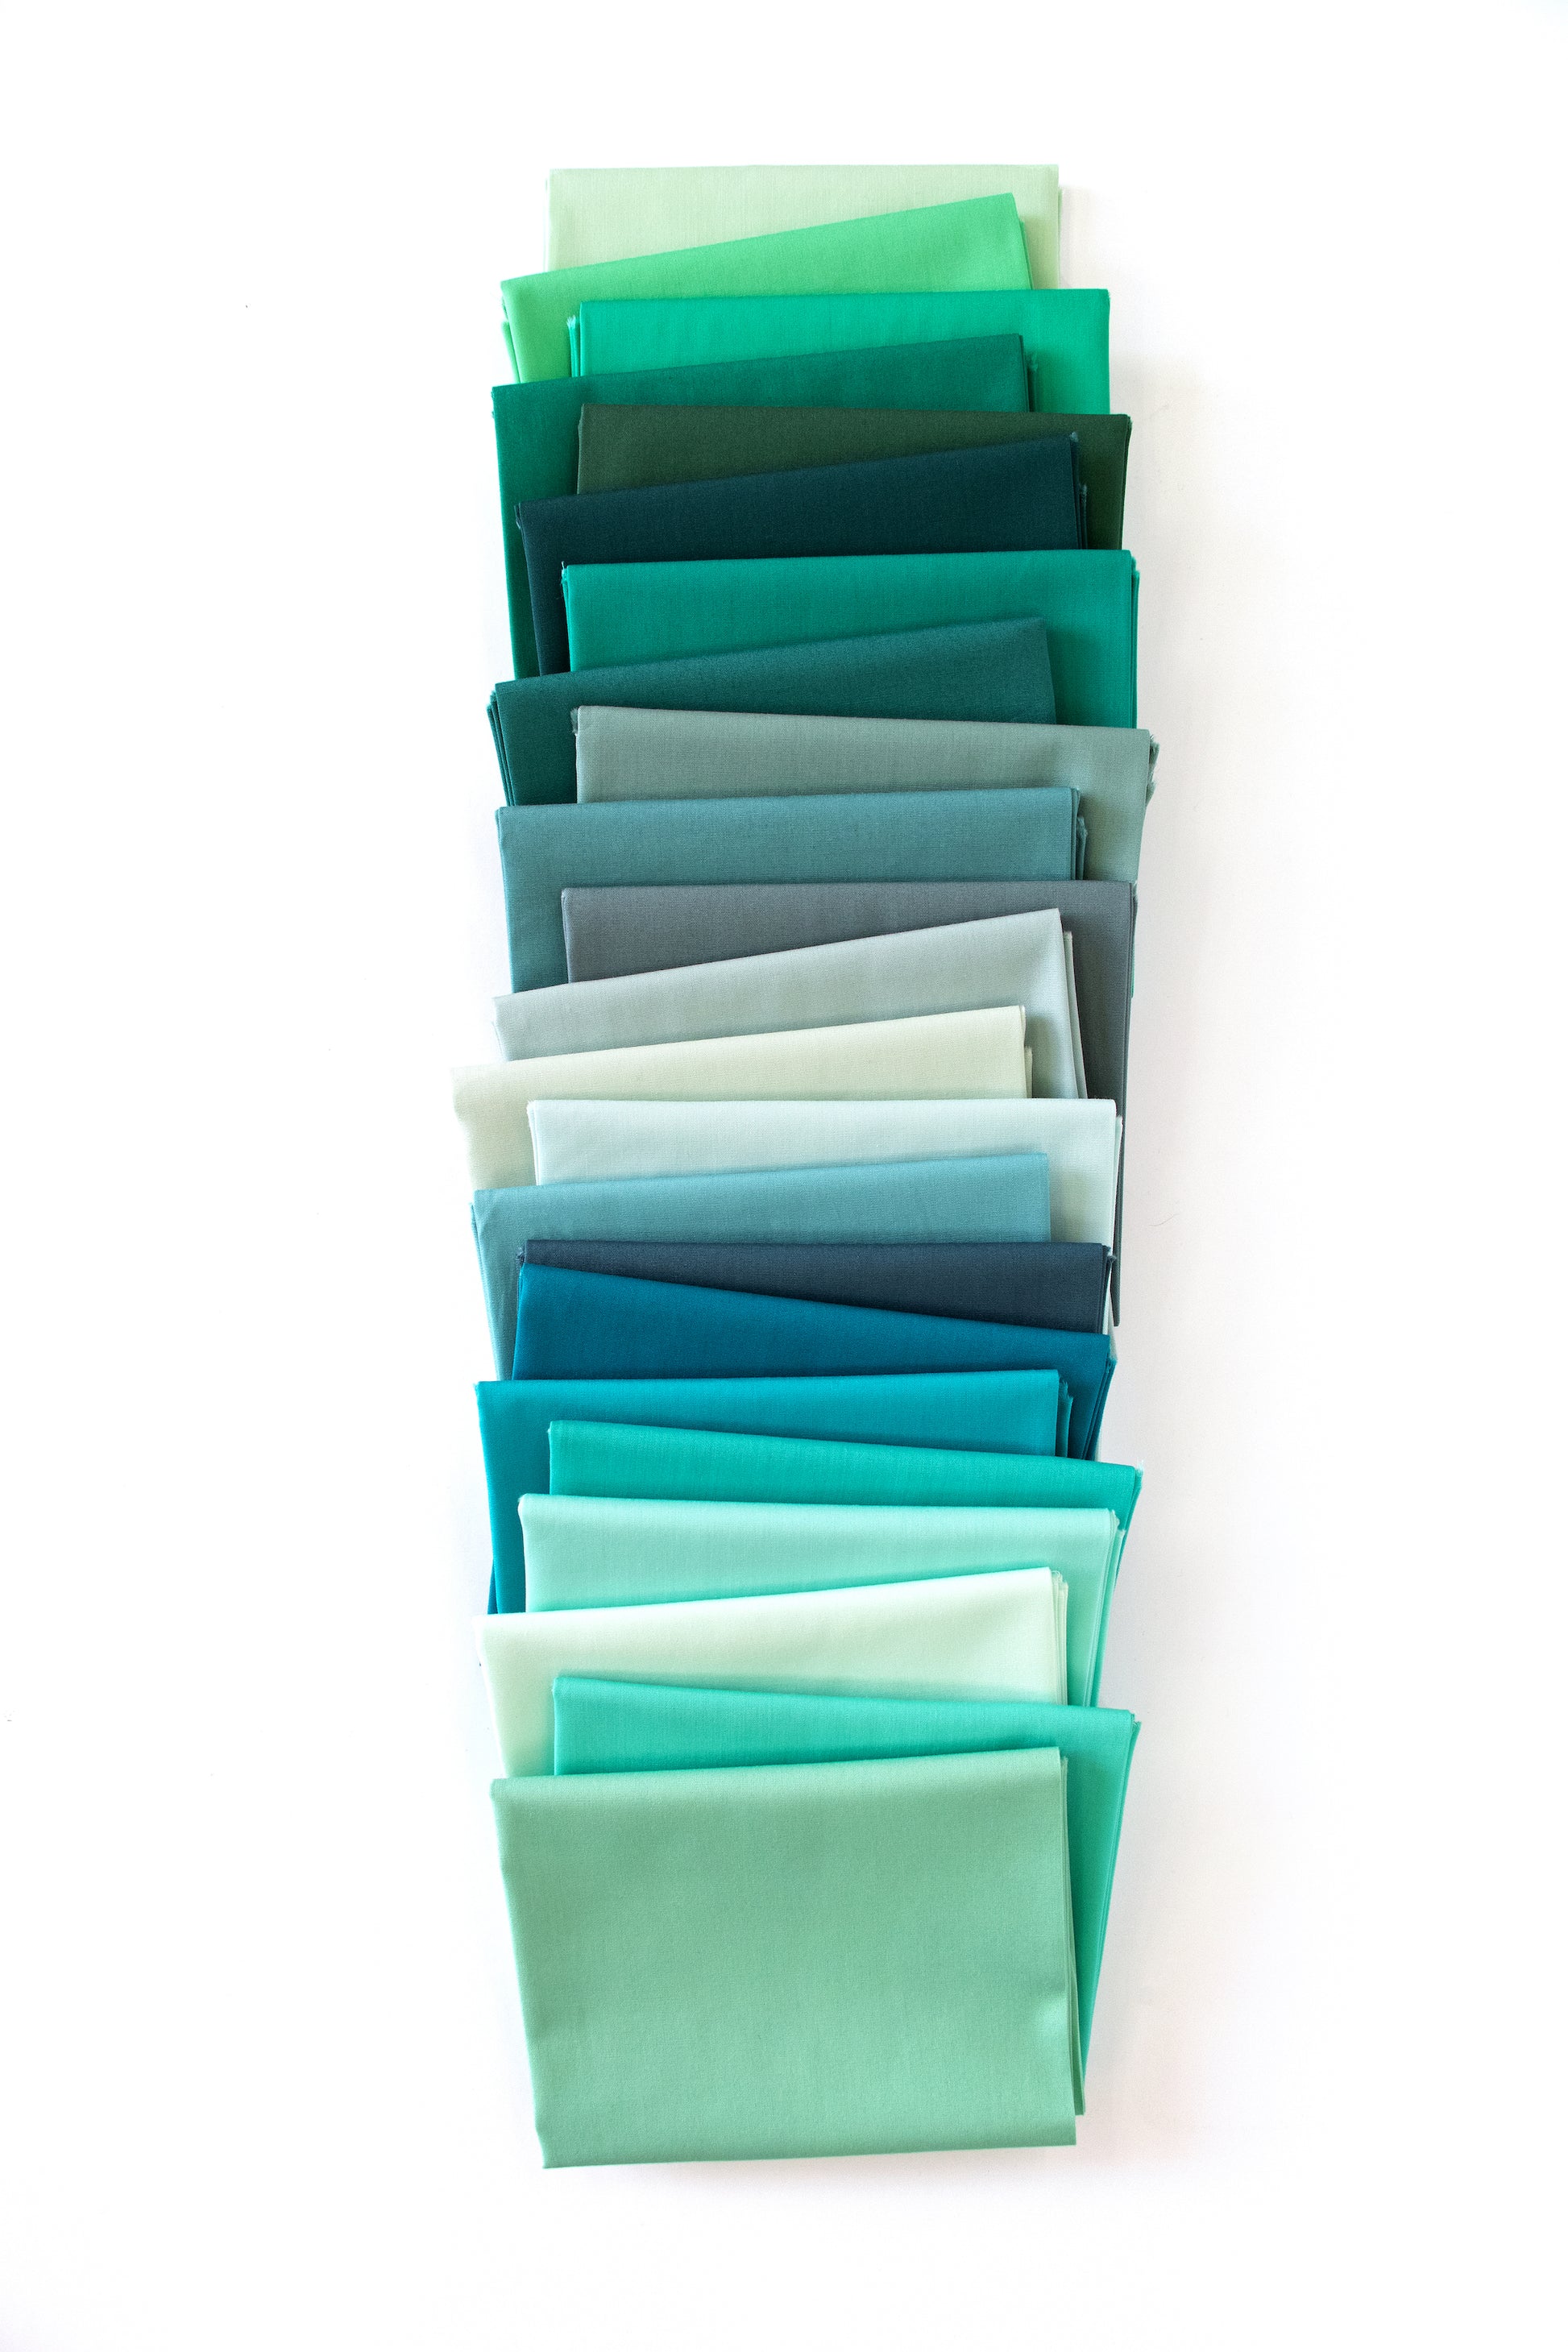 Teal Thoughts Bundle No 8 Color Master by Art Gallery Fabric 10 Fat Quarter  Bundle, 18 X 22 Premium Cotton FREE SHIPPING 